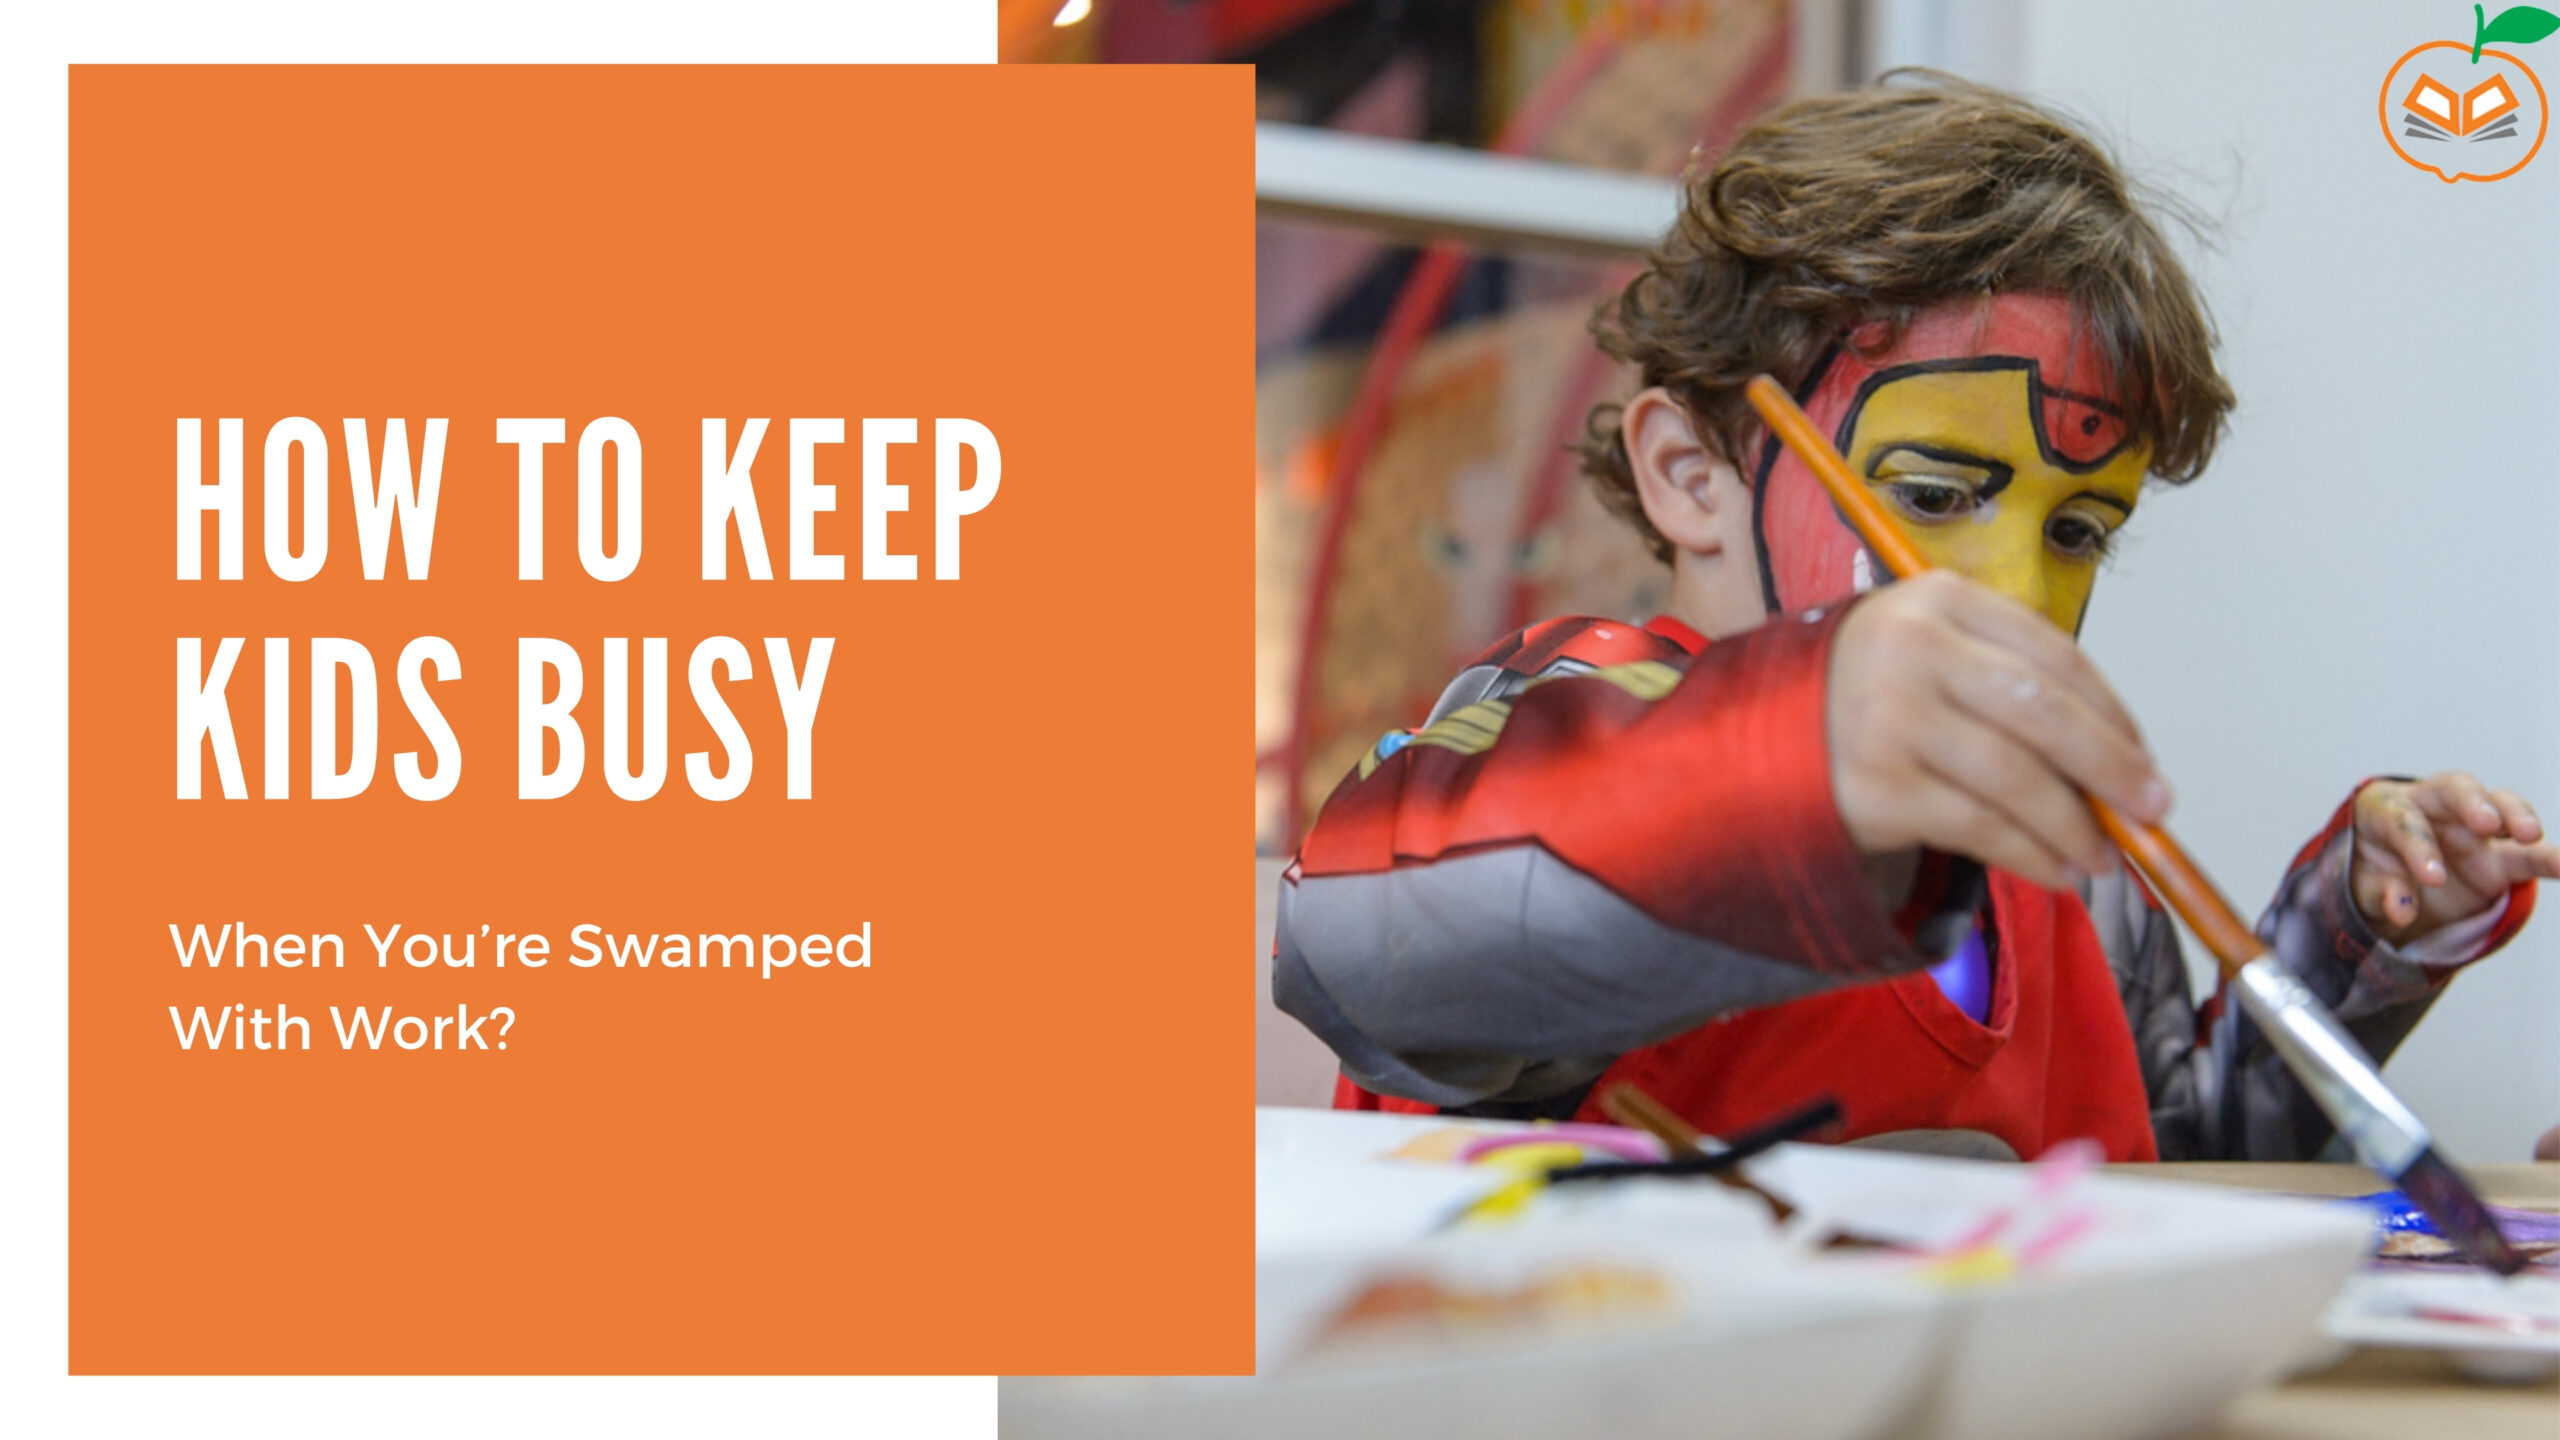 How to Keep Kids Busy When You’re Swamped With Work?s